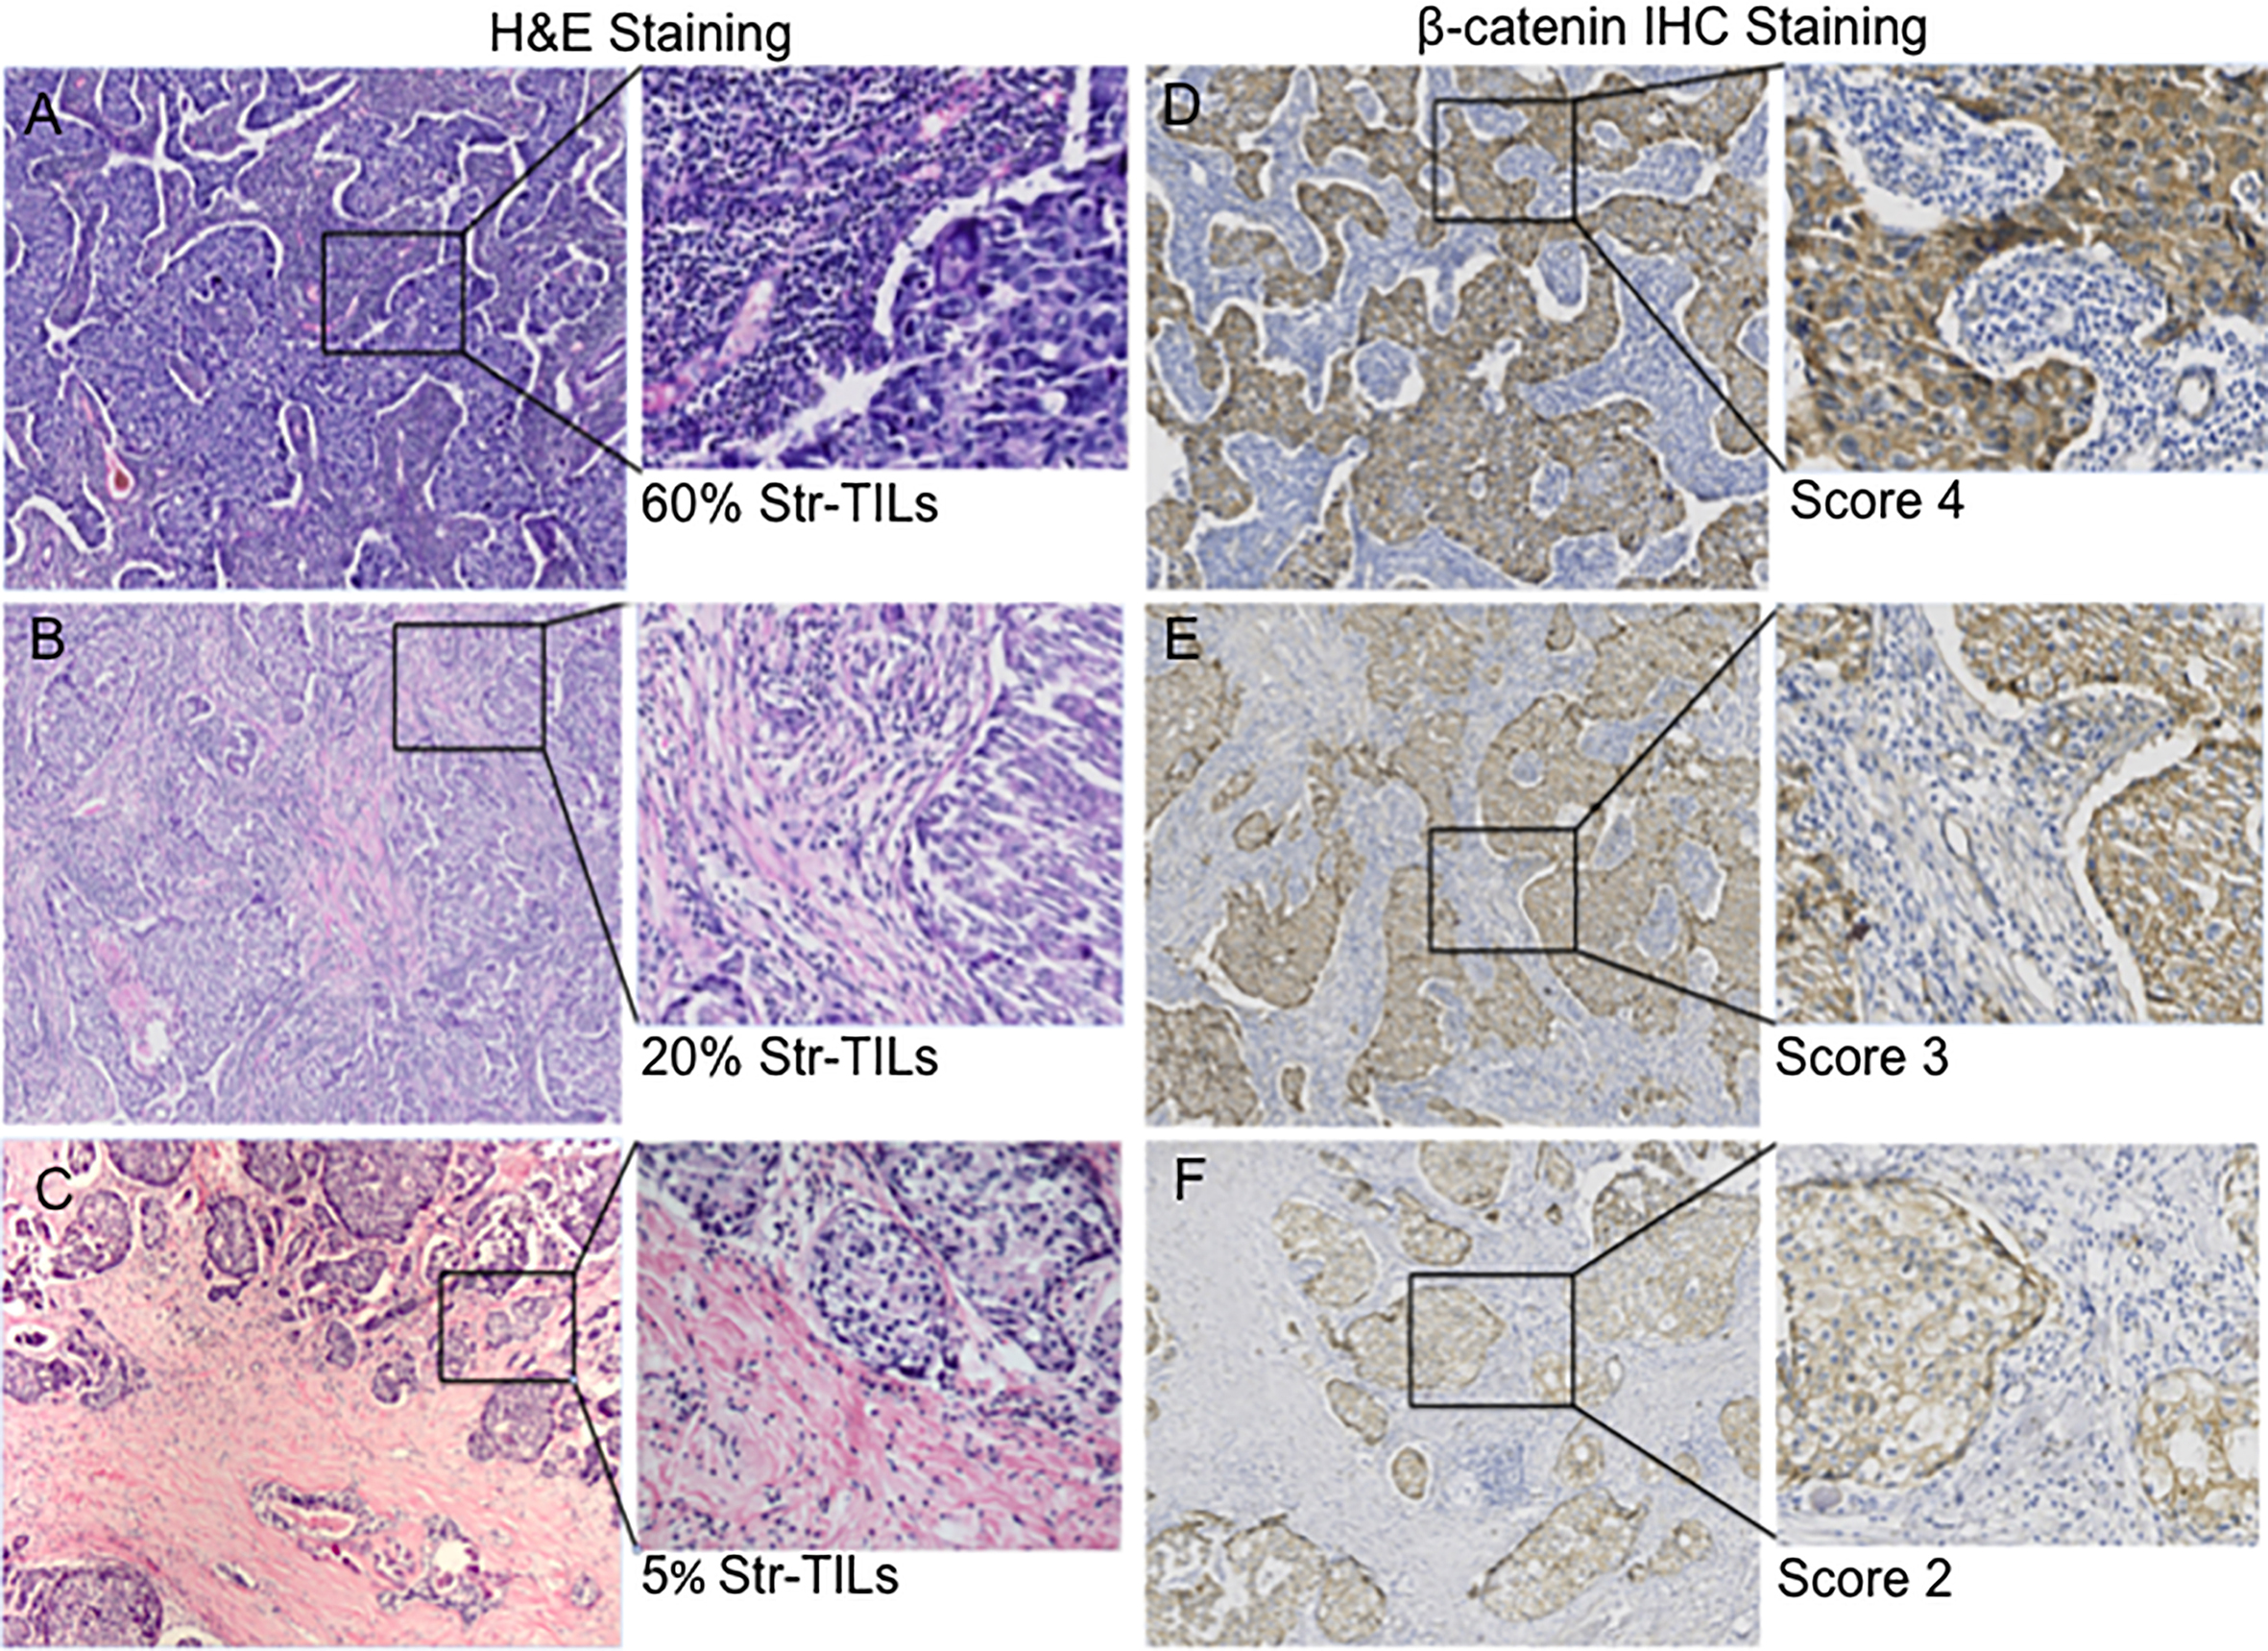 Correlation between TILs and β-catenin in breast cancer. Consecutive sections were used for immunohistochemical detection of TILs distribution and β-catenin expression in breast cancer specimens, and cells were evaluated in the same chosen area of the serial sections. Representative images (A–C) show different levels of lymphocyte infiltration in tumor stroma by H&E staining. TILs are reported as the percentage of area occupied by mononuclear inflammatory cells over total intratumoral stromal area, within the borders of the invasive tumor. Corresponding sections were stained with β-catenin antibody by standard IHC techniques (D–F). Scores shown are final staining scores defined according to the H score of cytoplasmic β-catenin expression.